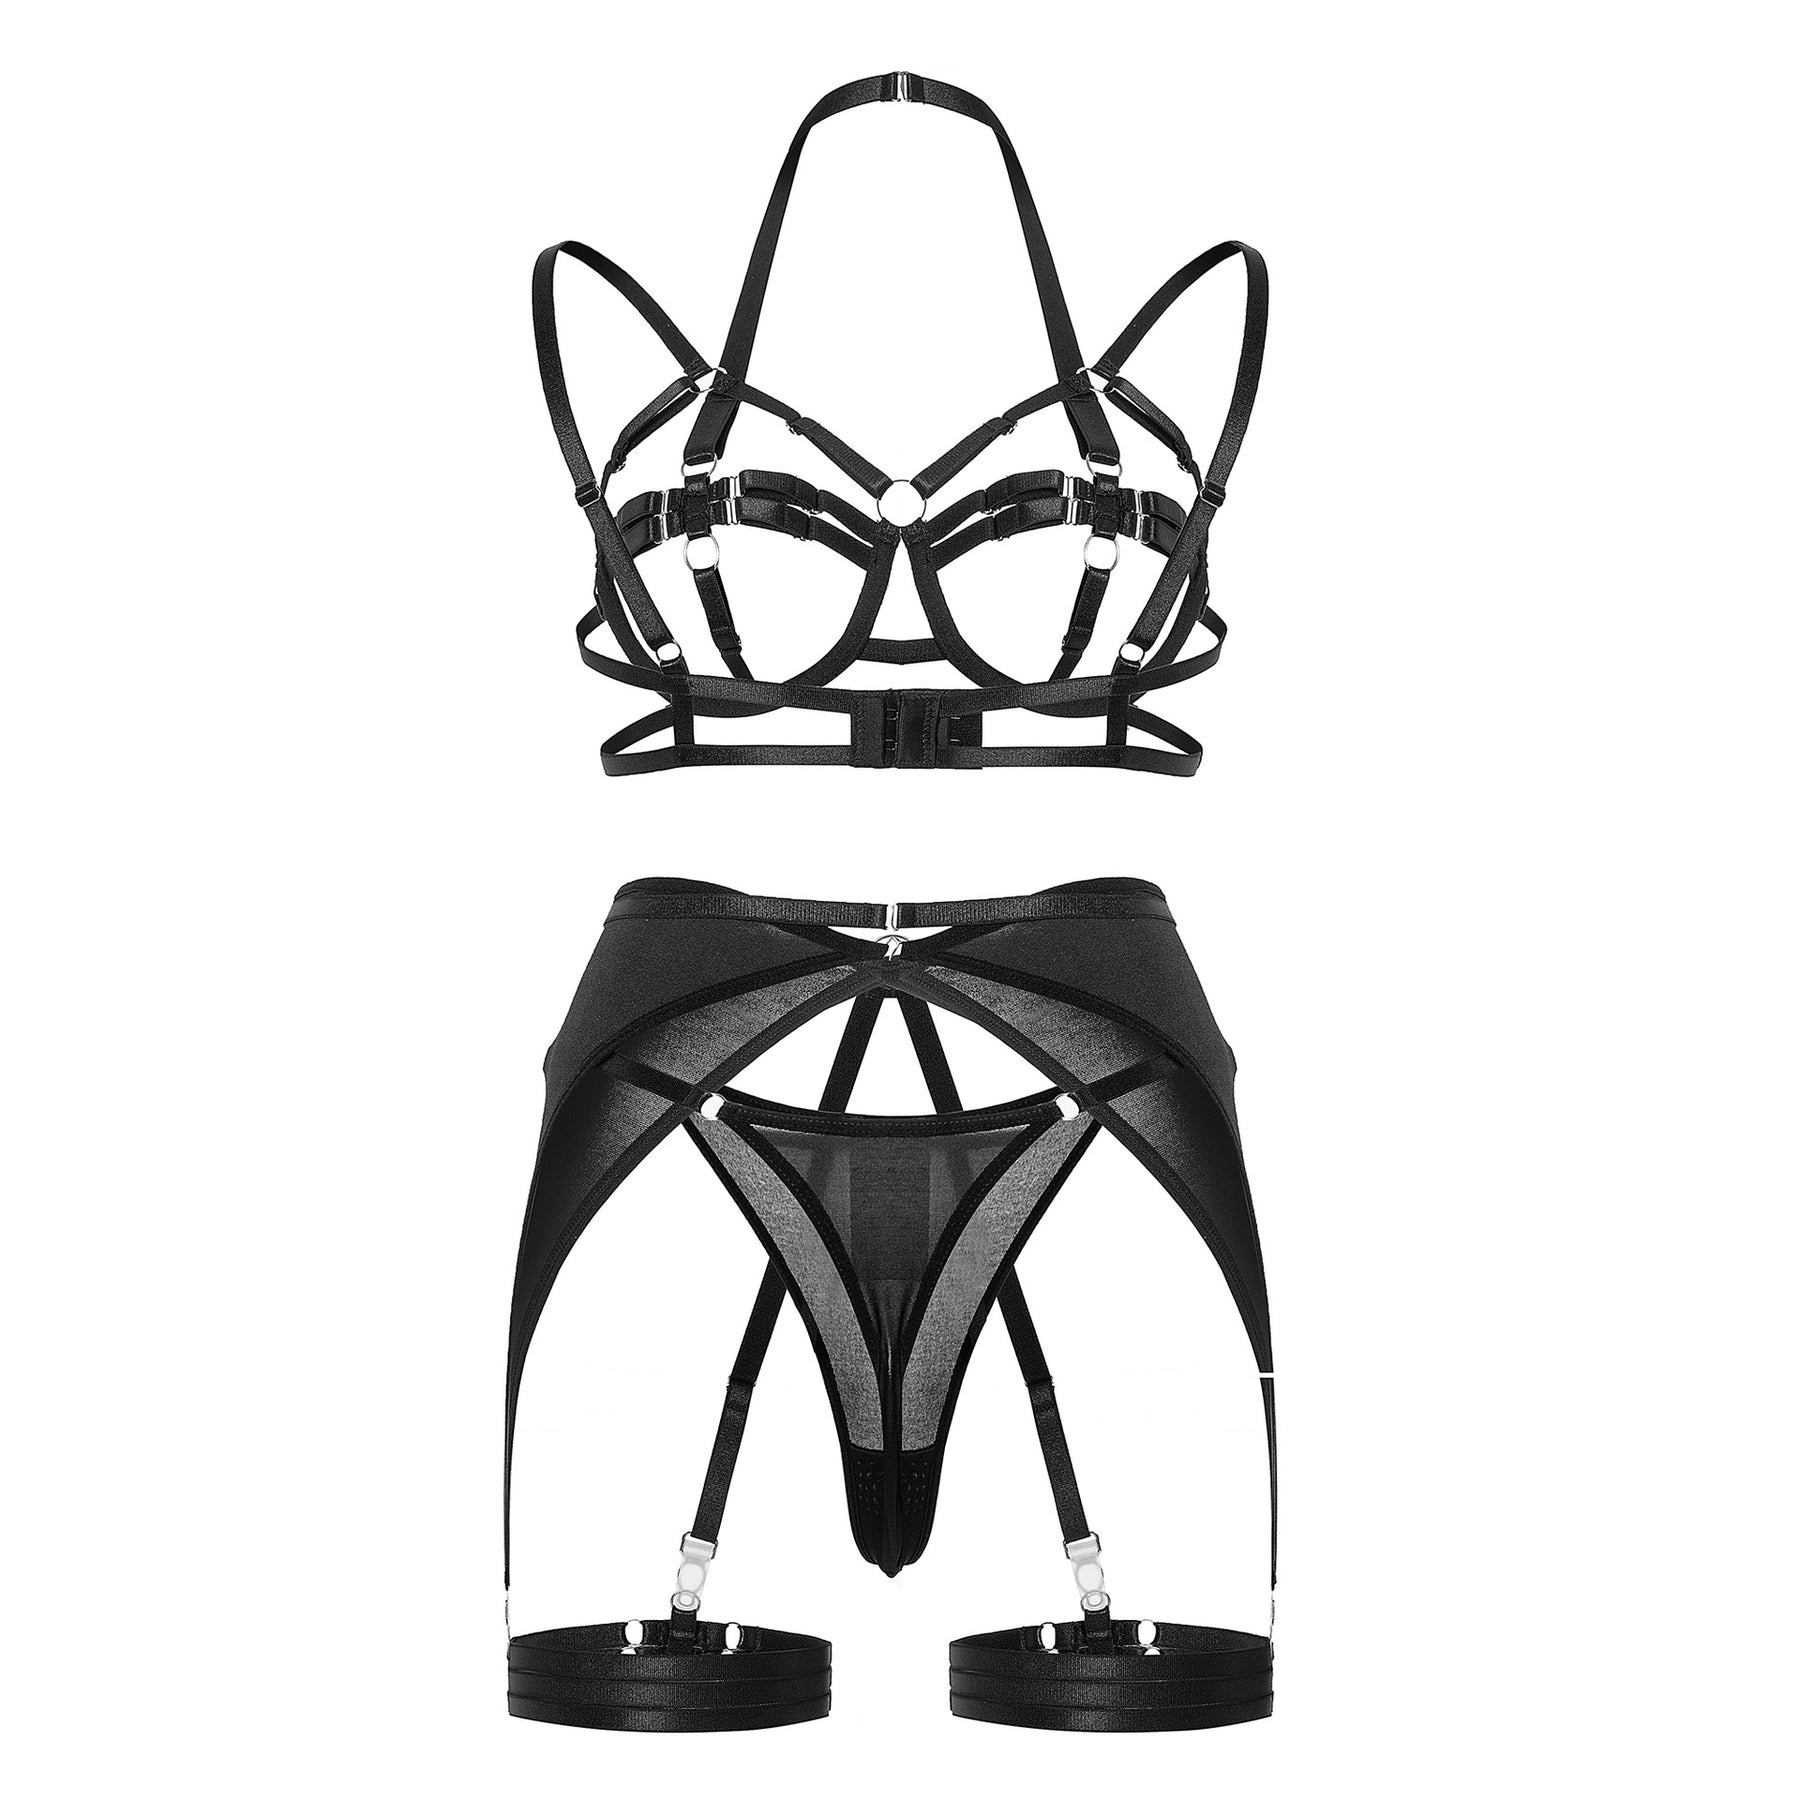 Open Brust Strappy Bandage Sexy Lingerie Set